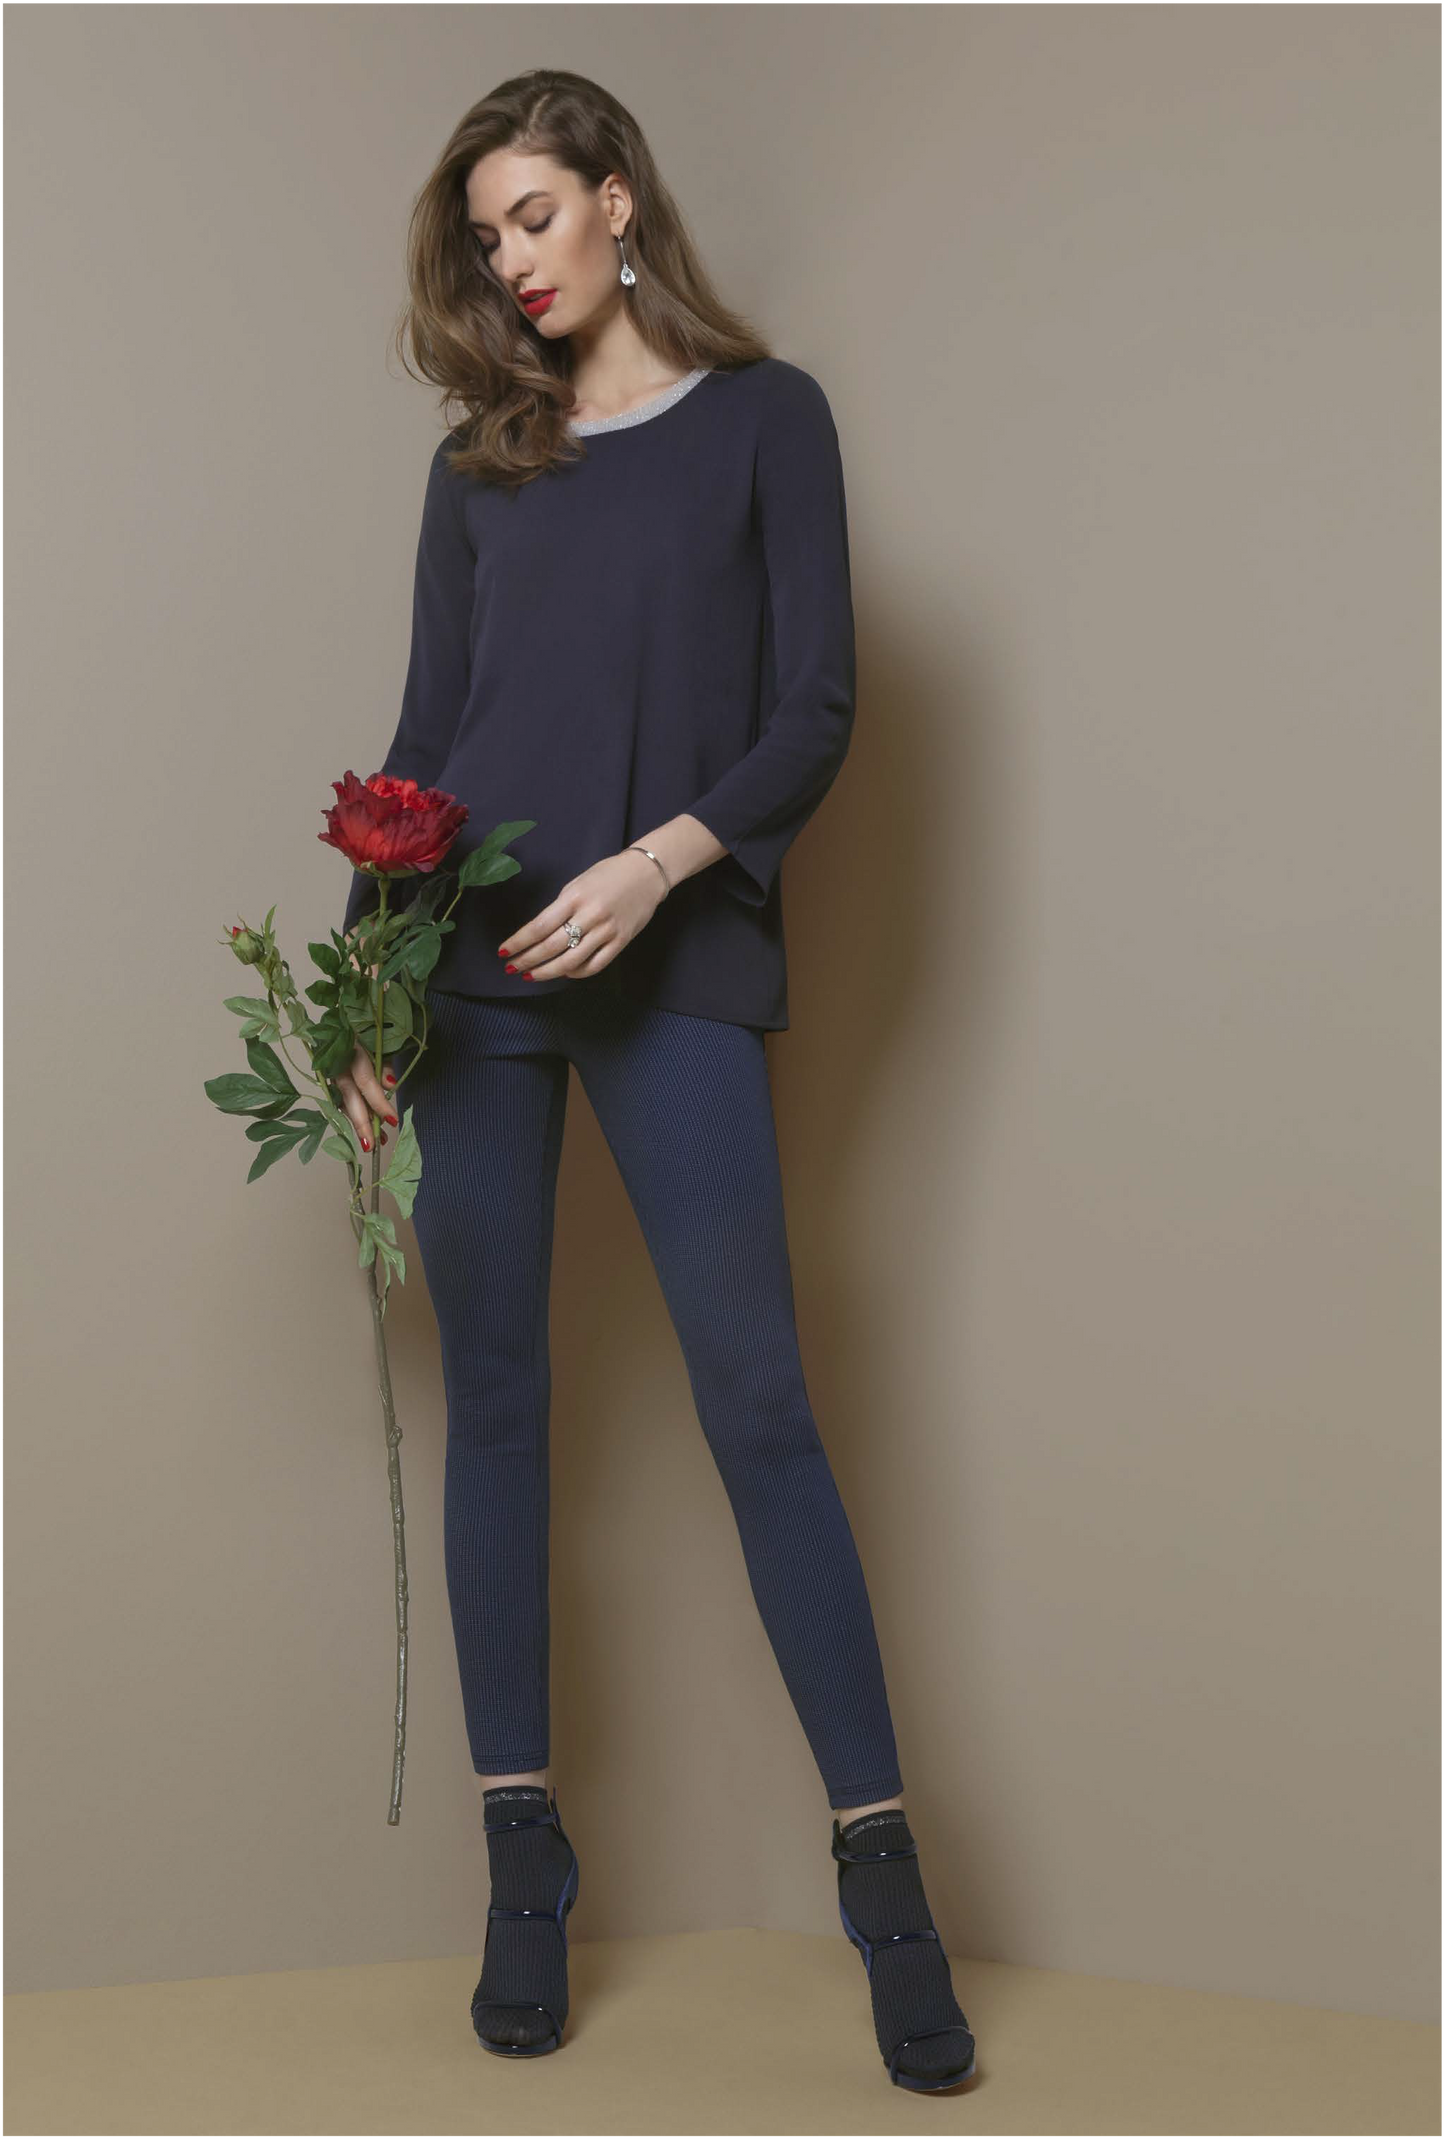 Omsa Private Leggings - Navy stretch trouser leggings (treggings) in navy with a blue dotted pinstripe and rear pockets.